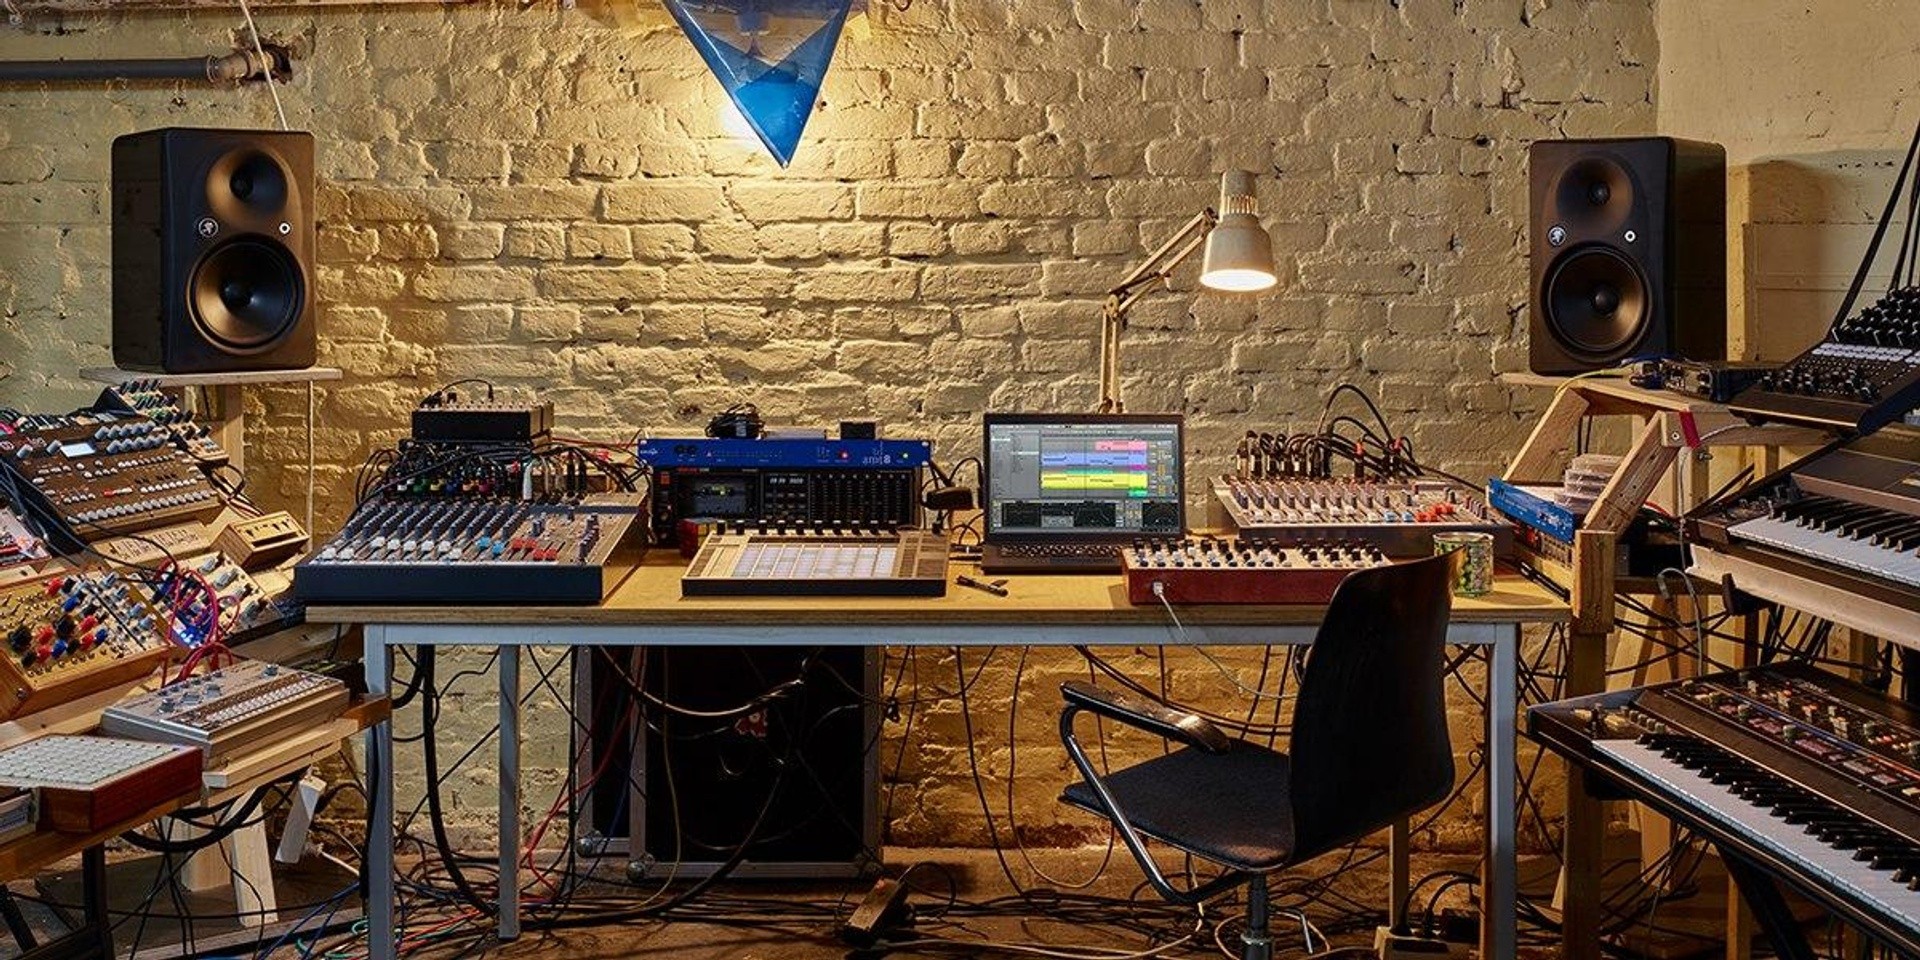 Ableton Live 10 Suite is now available free for 90 days